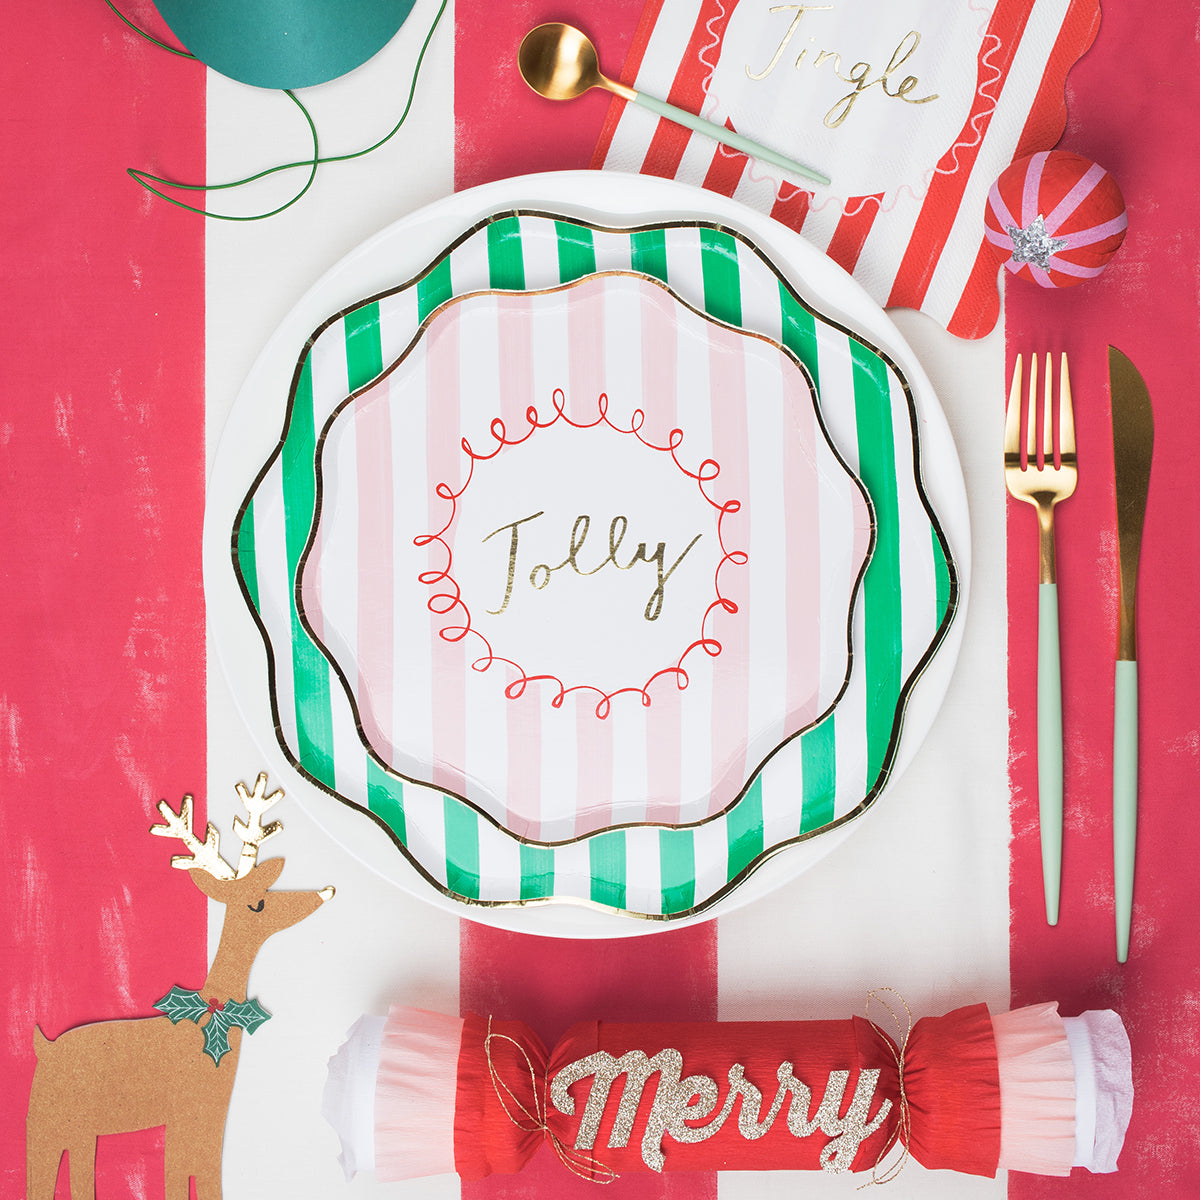 Our paper napkins, with reindeer details, are great as Christmas table decorations.